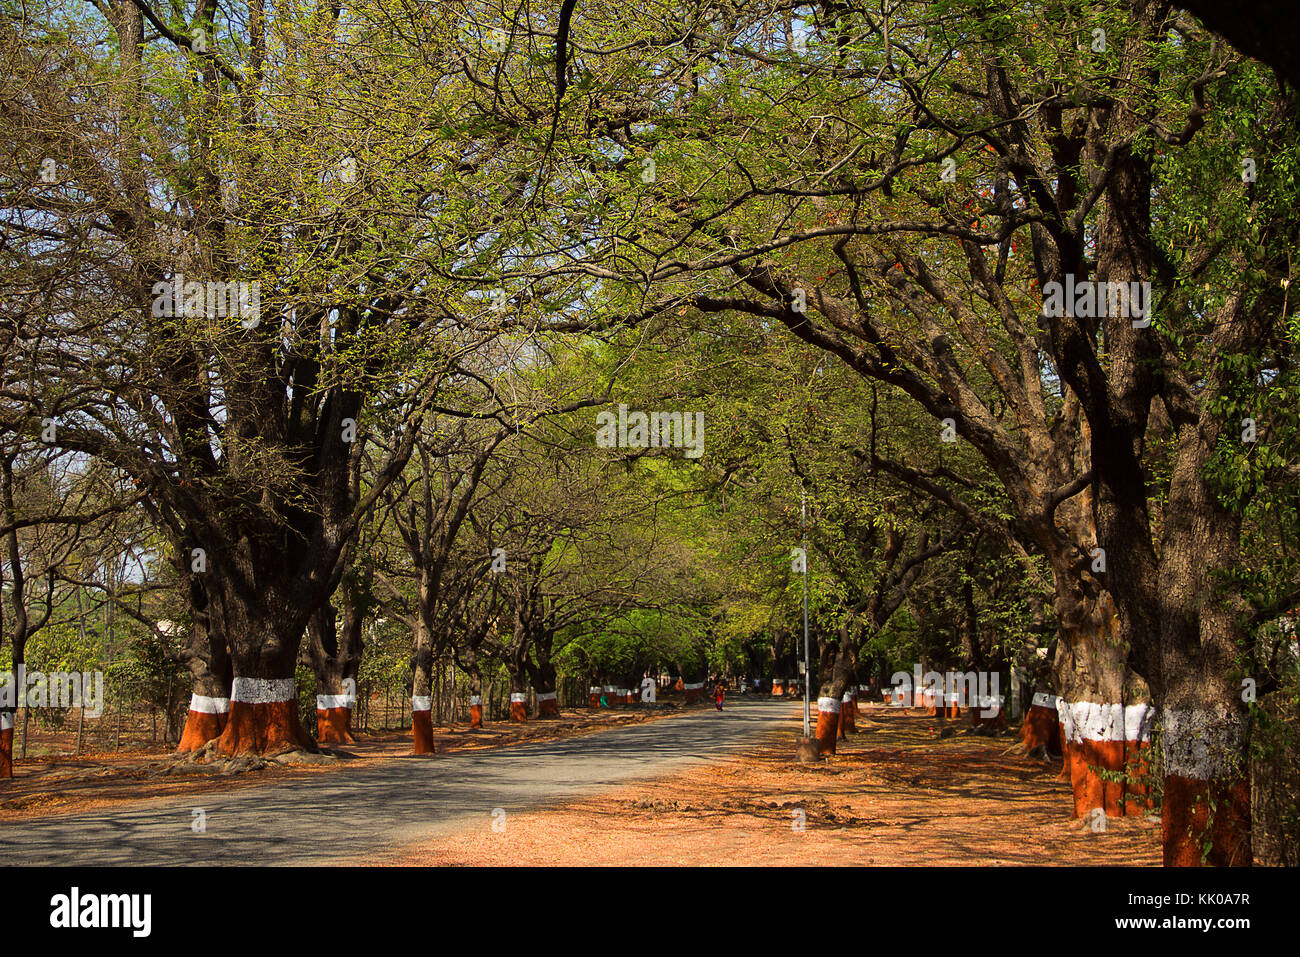 Woman walking across road full with tamarind tree canopy, Savitribai Phule agriculture college, Pune Stock Photo